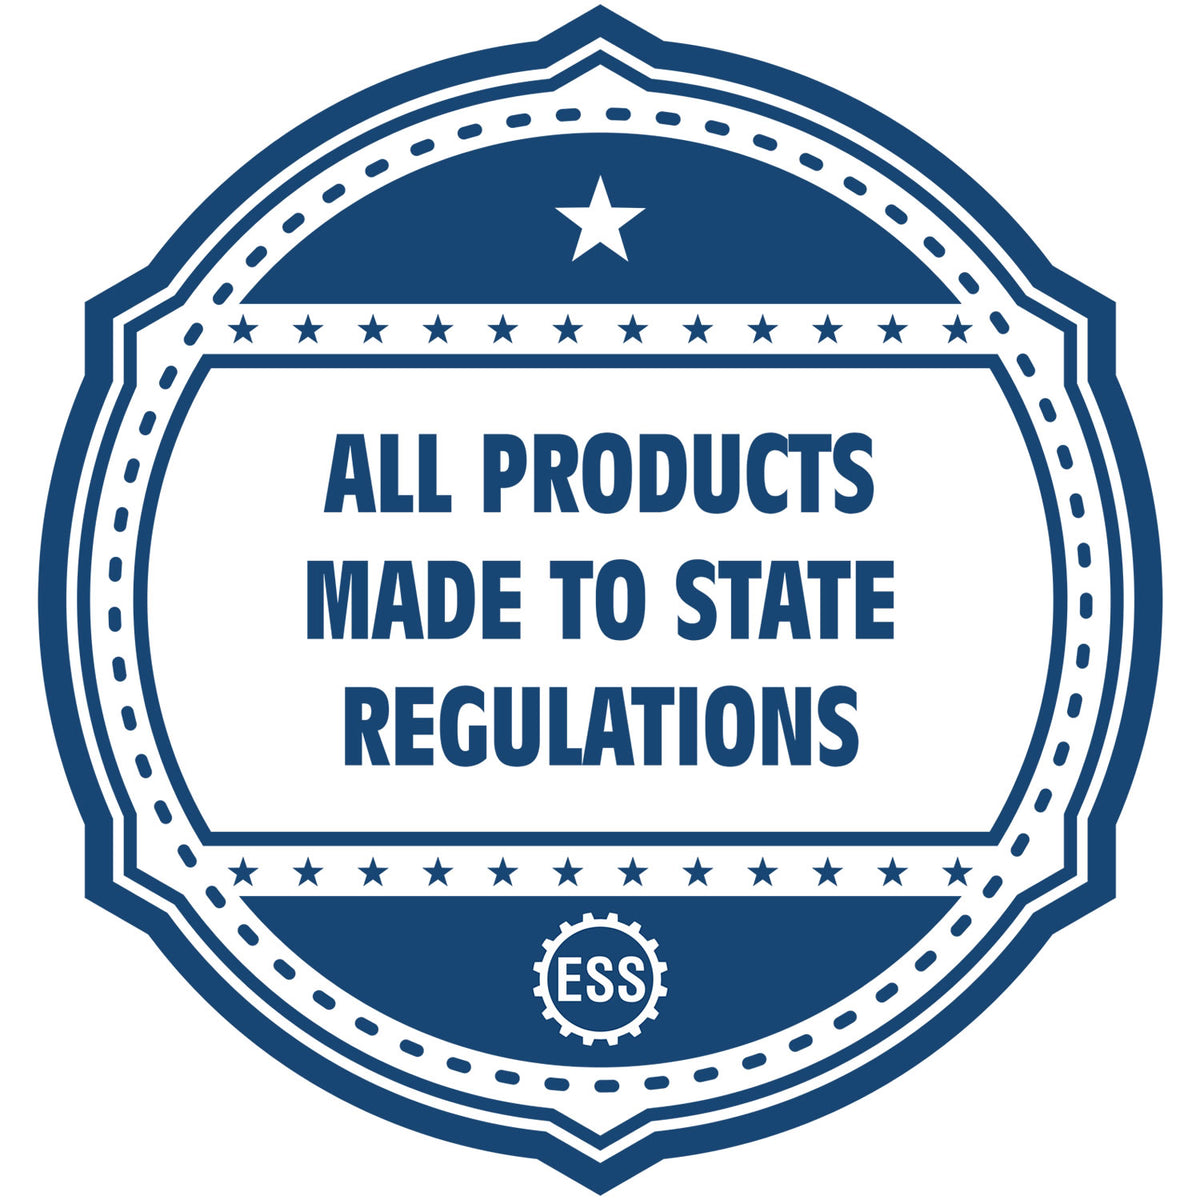 An icon or badge element for the Digital Wisconsin Landscape Architect Stamp showing that this product is made in compliance with state regulations.